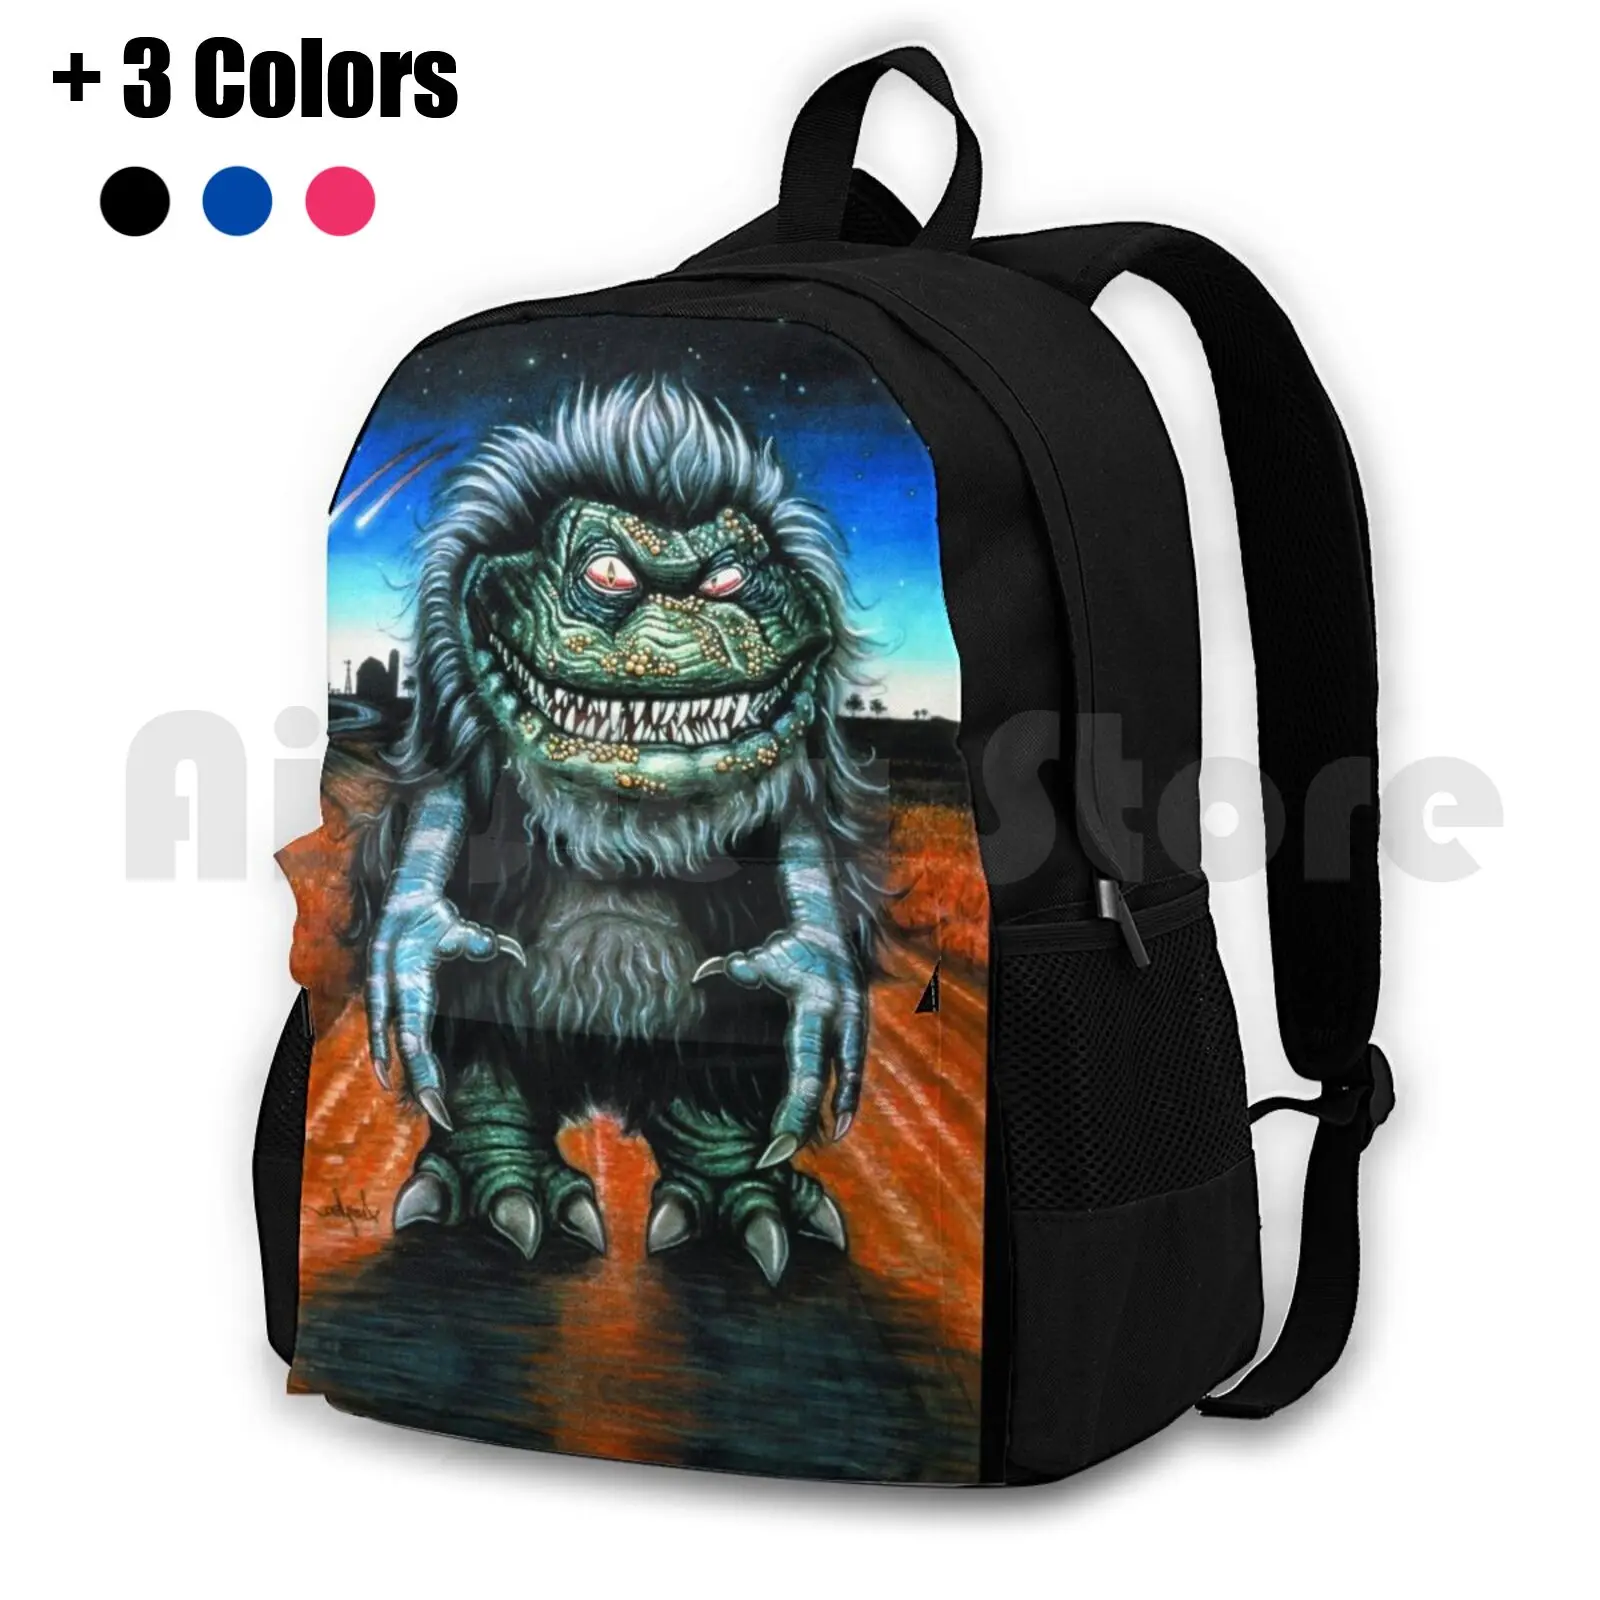 

Textless Critters Movie Poster Outdoor Hiking Backpack Waterproof Camping Travel Critters Monsters Cinema Movies Films 80S